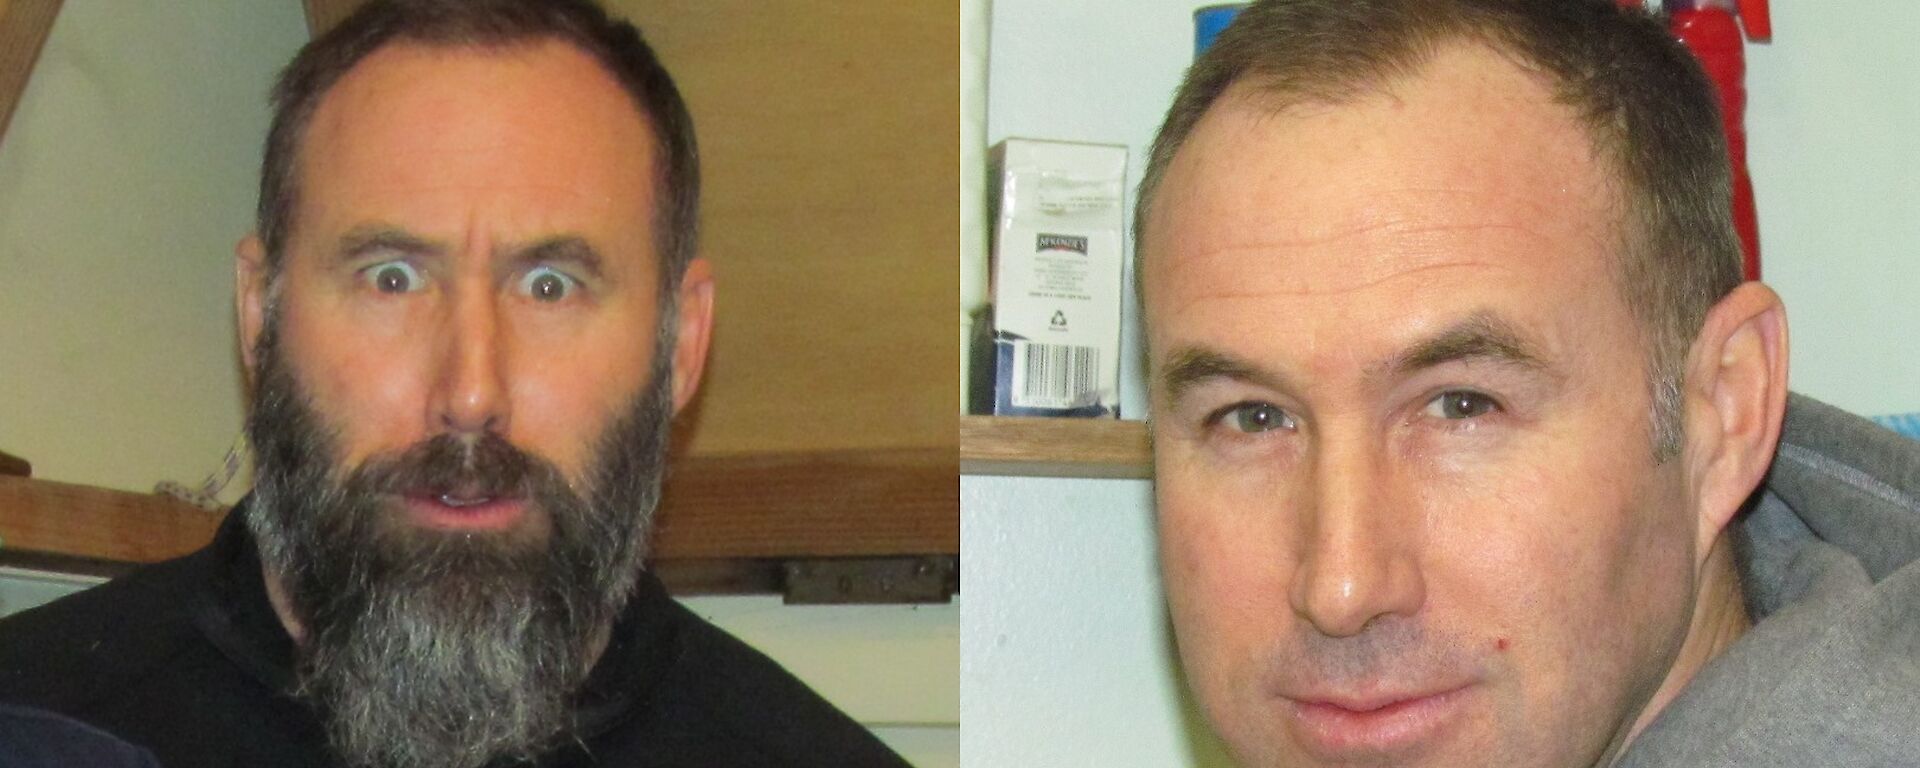 A before and after photo of an expeditioner who has shaved off his beard and moustache.